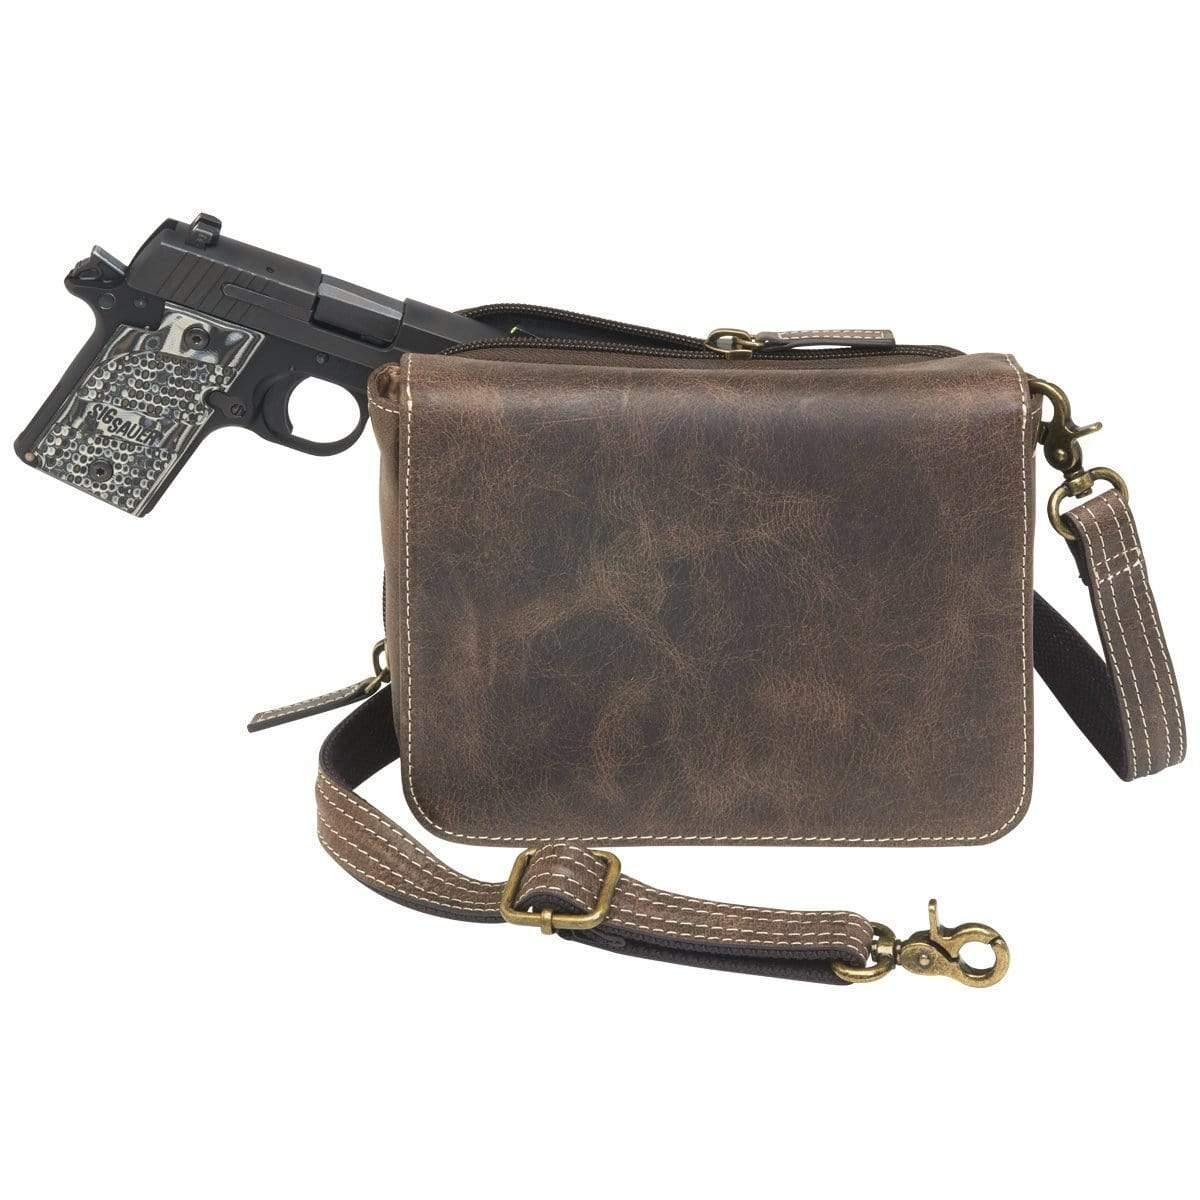 Concealed Carry Distressed Buffalo Leather Cross Body Organizer Purse by GTM Original